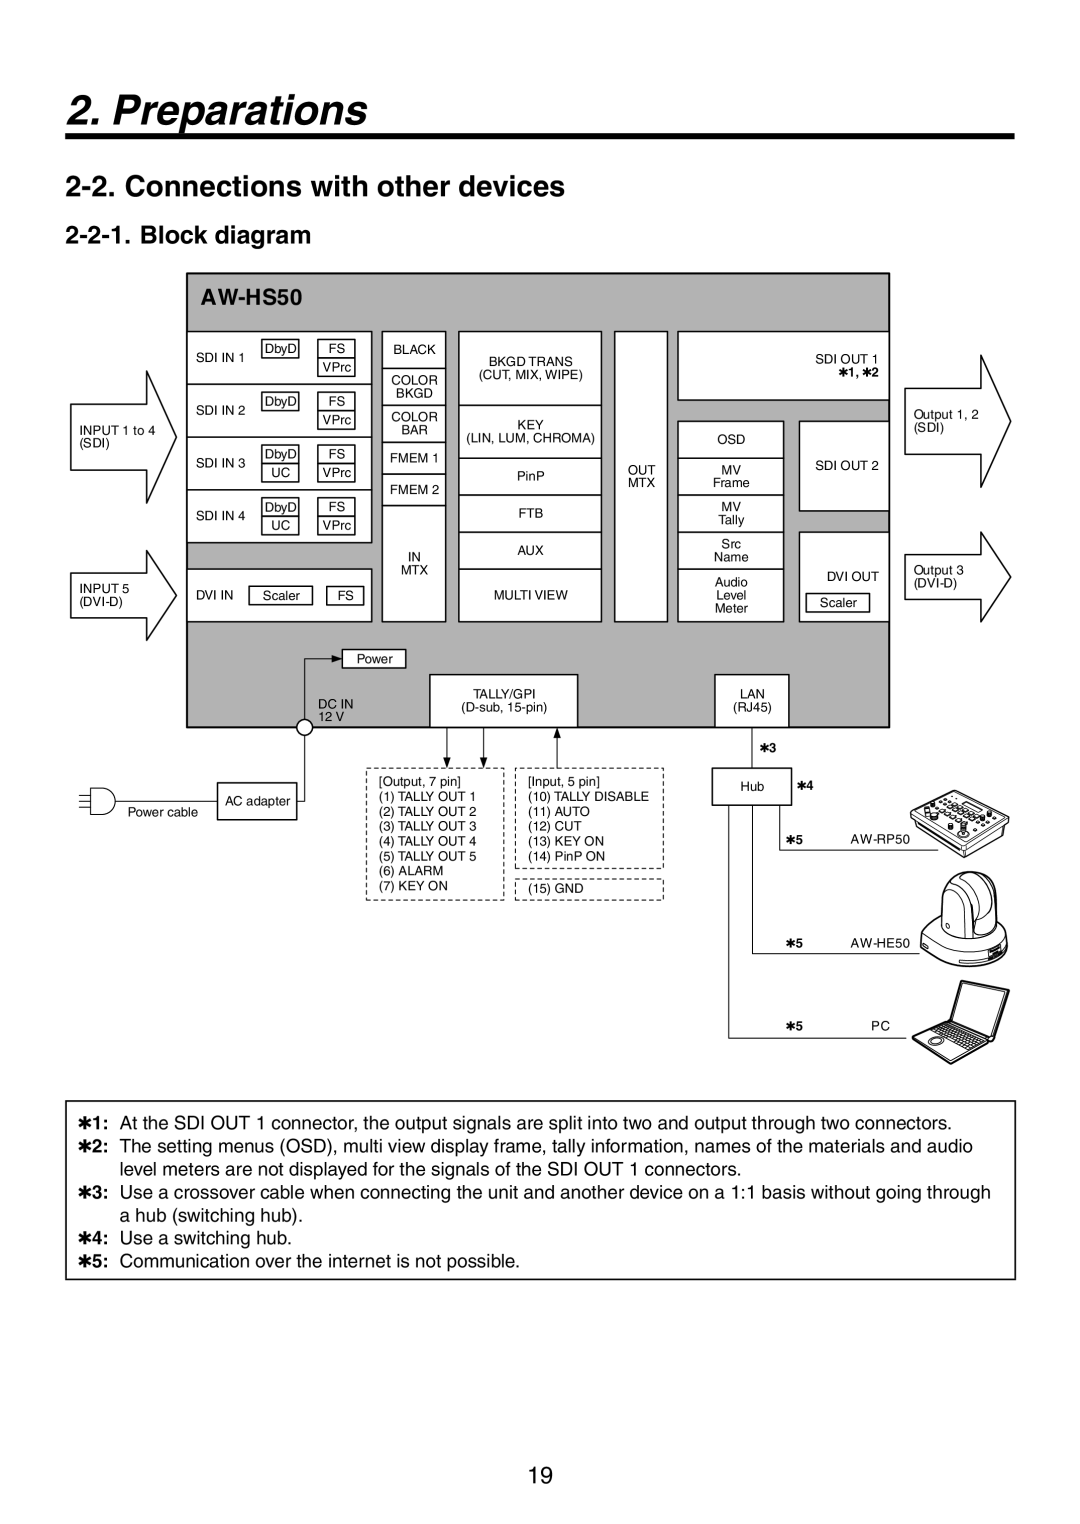 Panasonic AW-HS50N operating instructions Preparations, Connections with other devices, Block diagram 